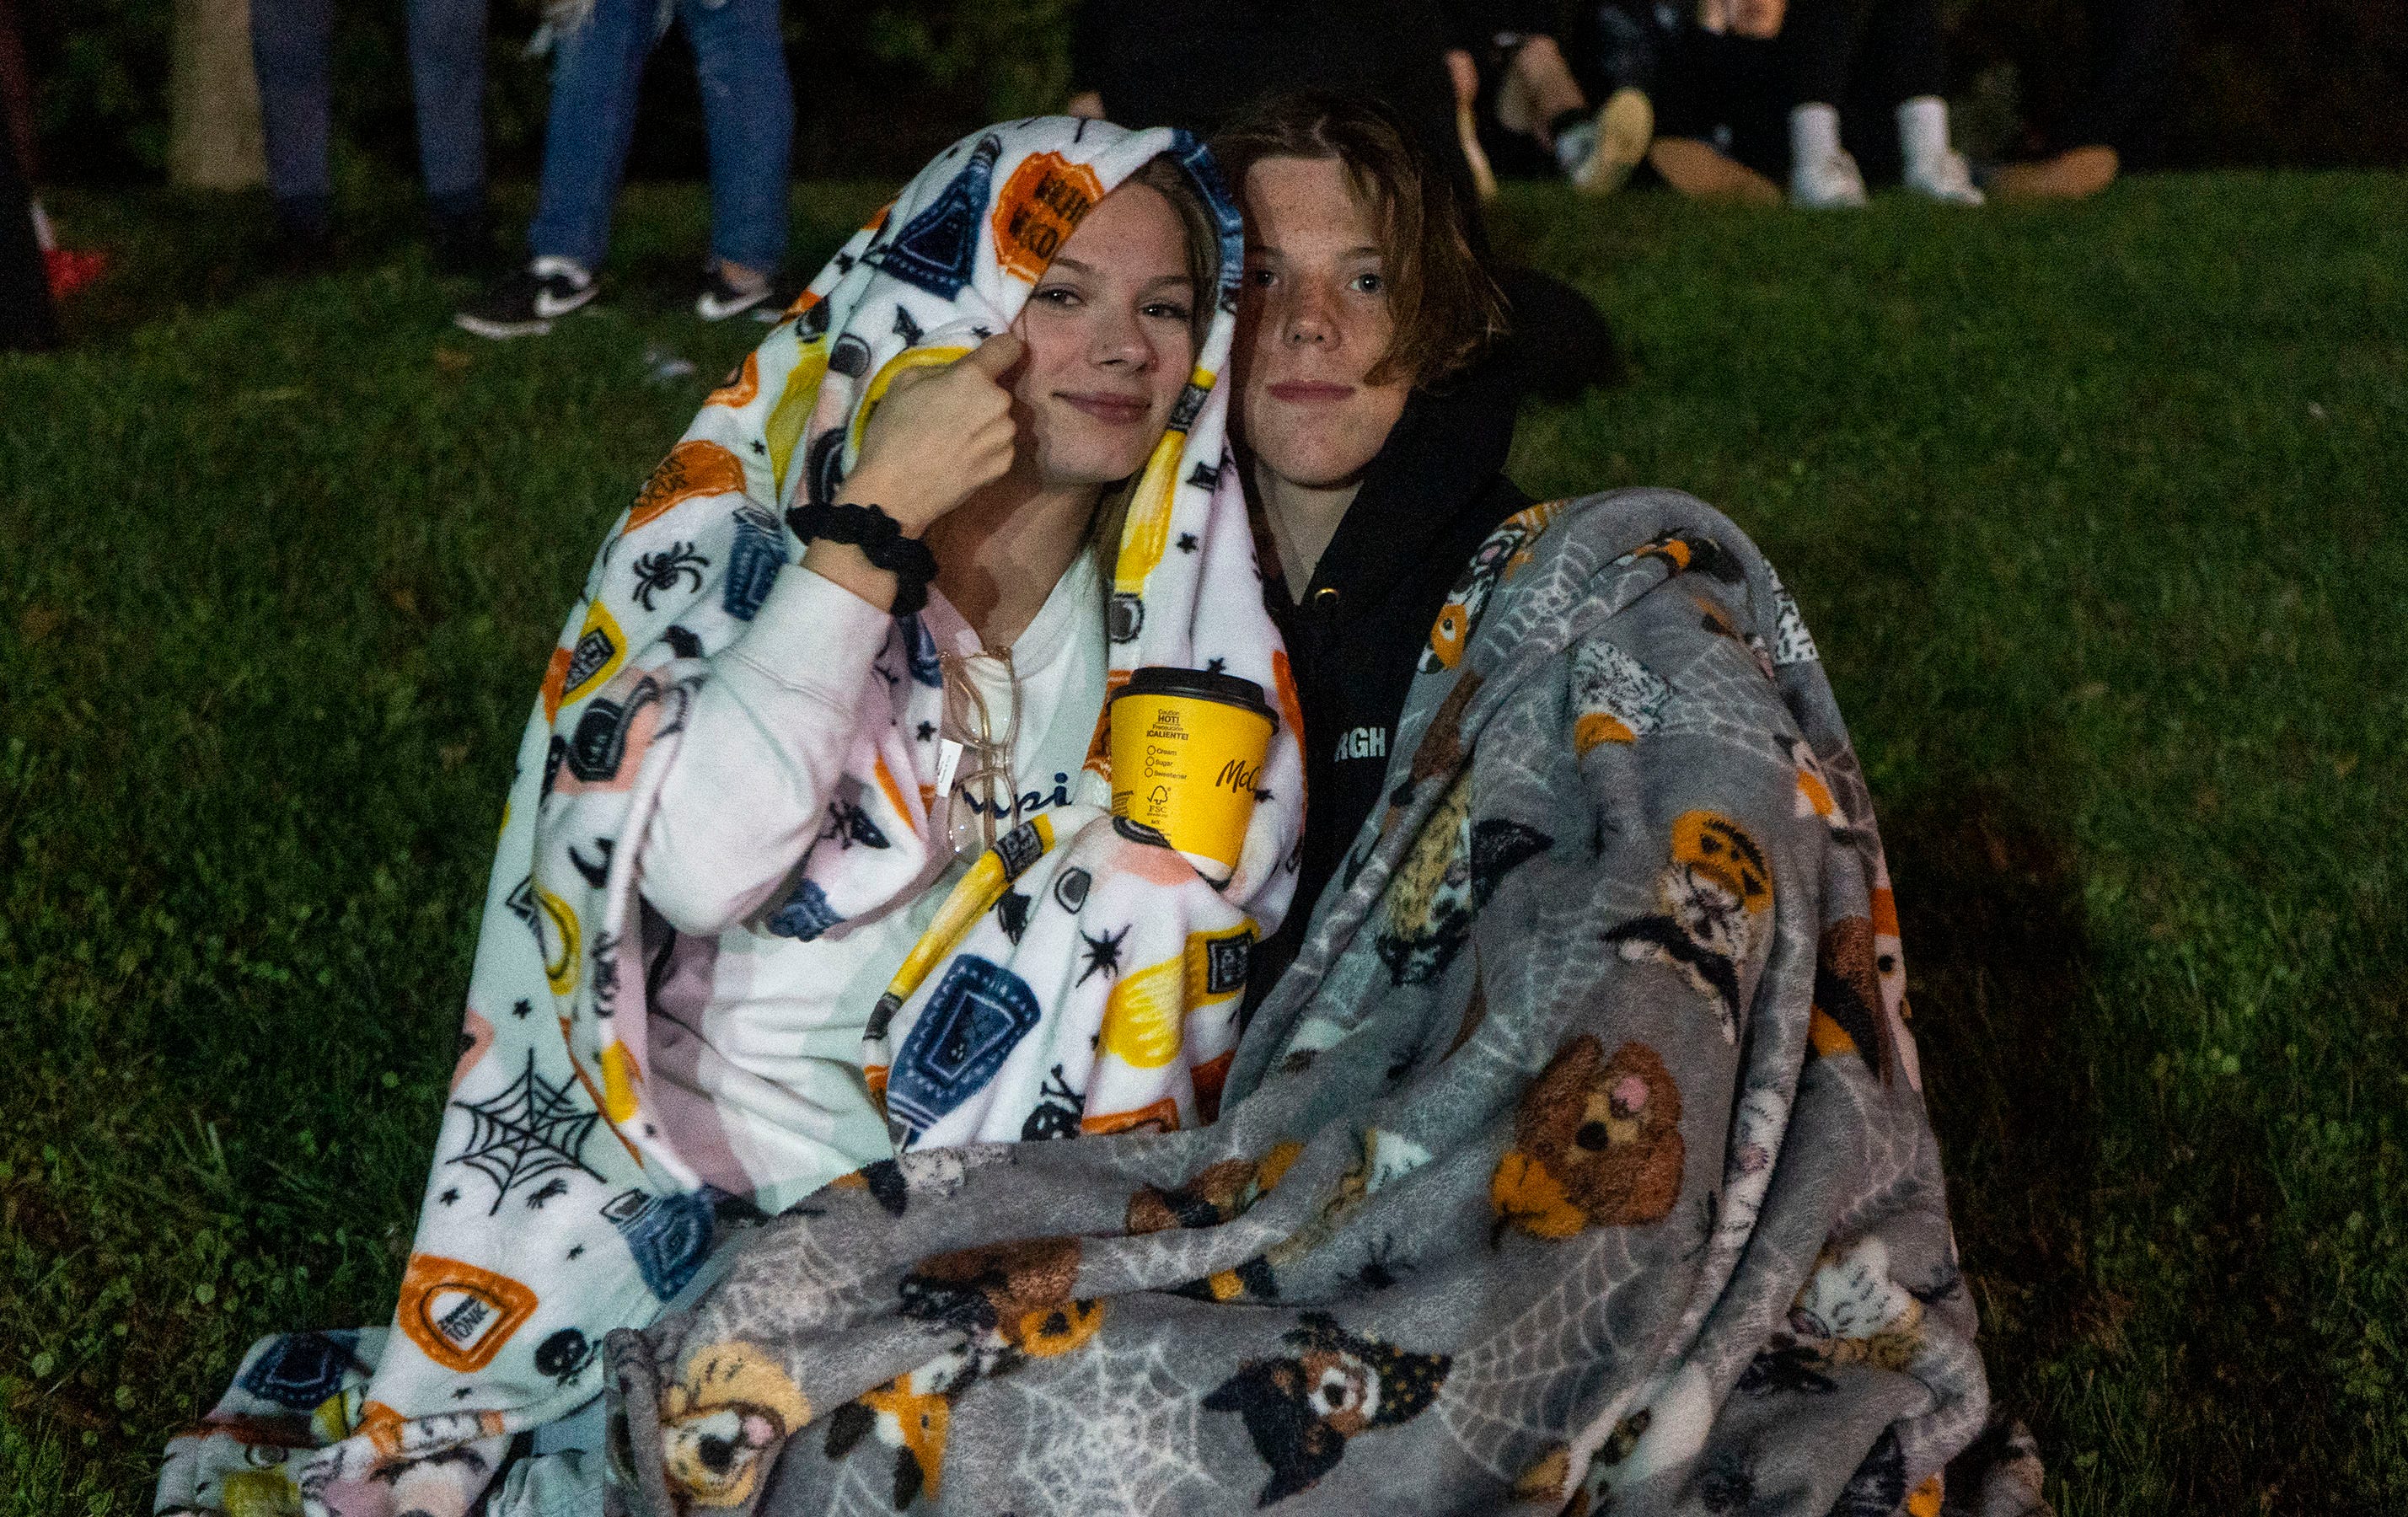 Chloe Moose and Elijah Hewitt at Northeastern's homecoming bonfire in Manchester on Thursday, Sept. 29, 2022.